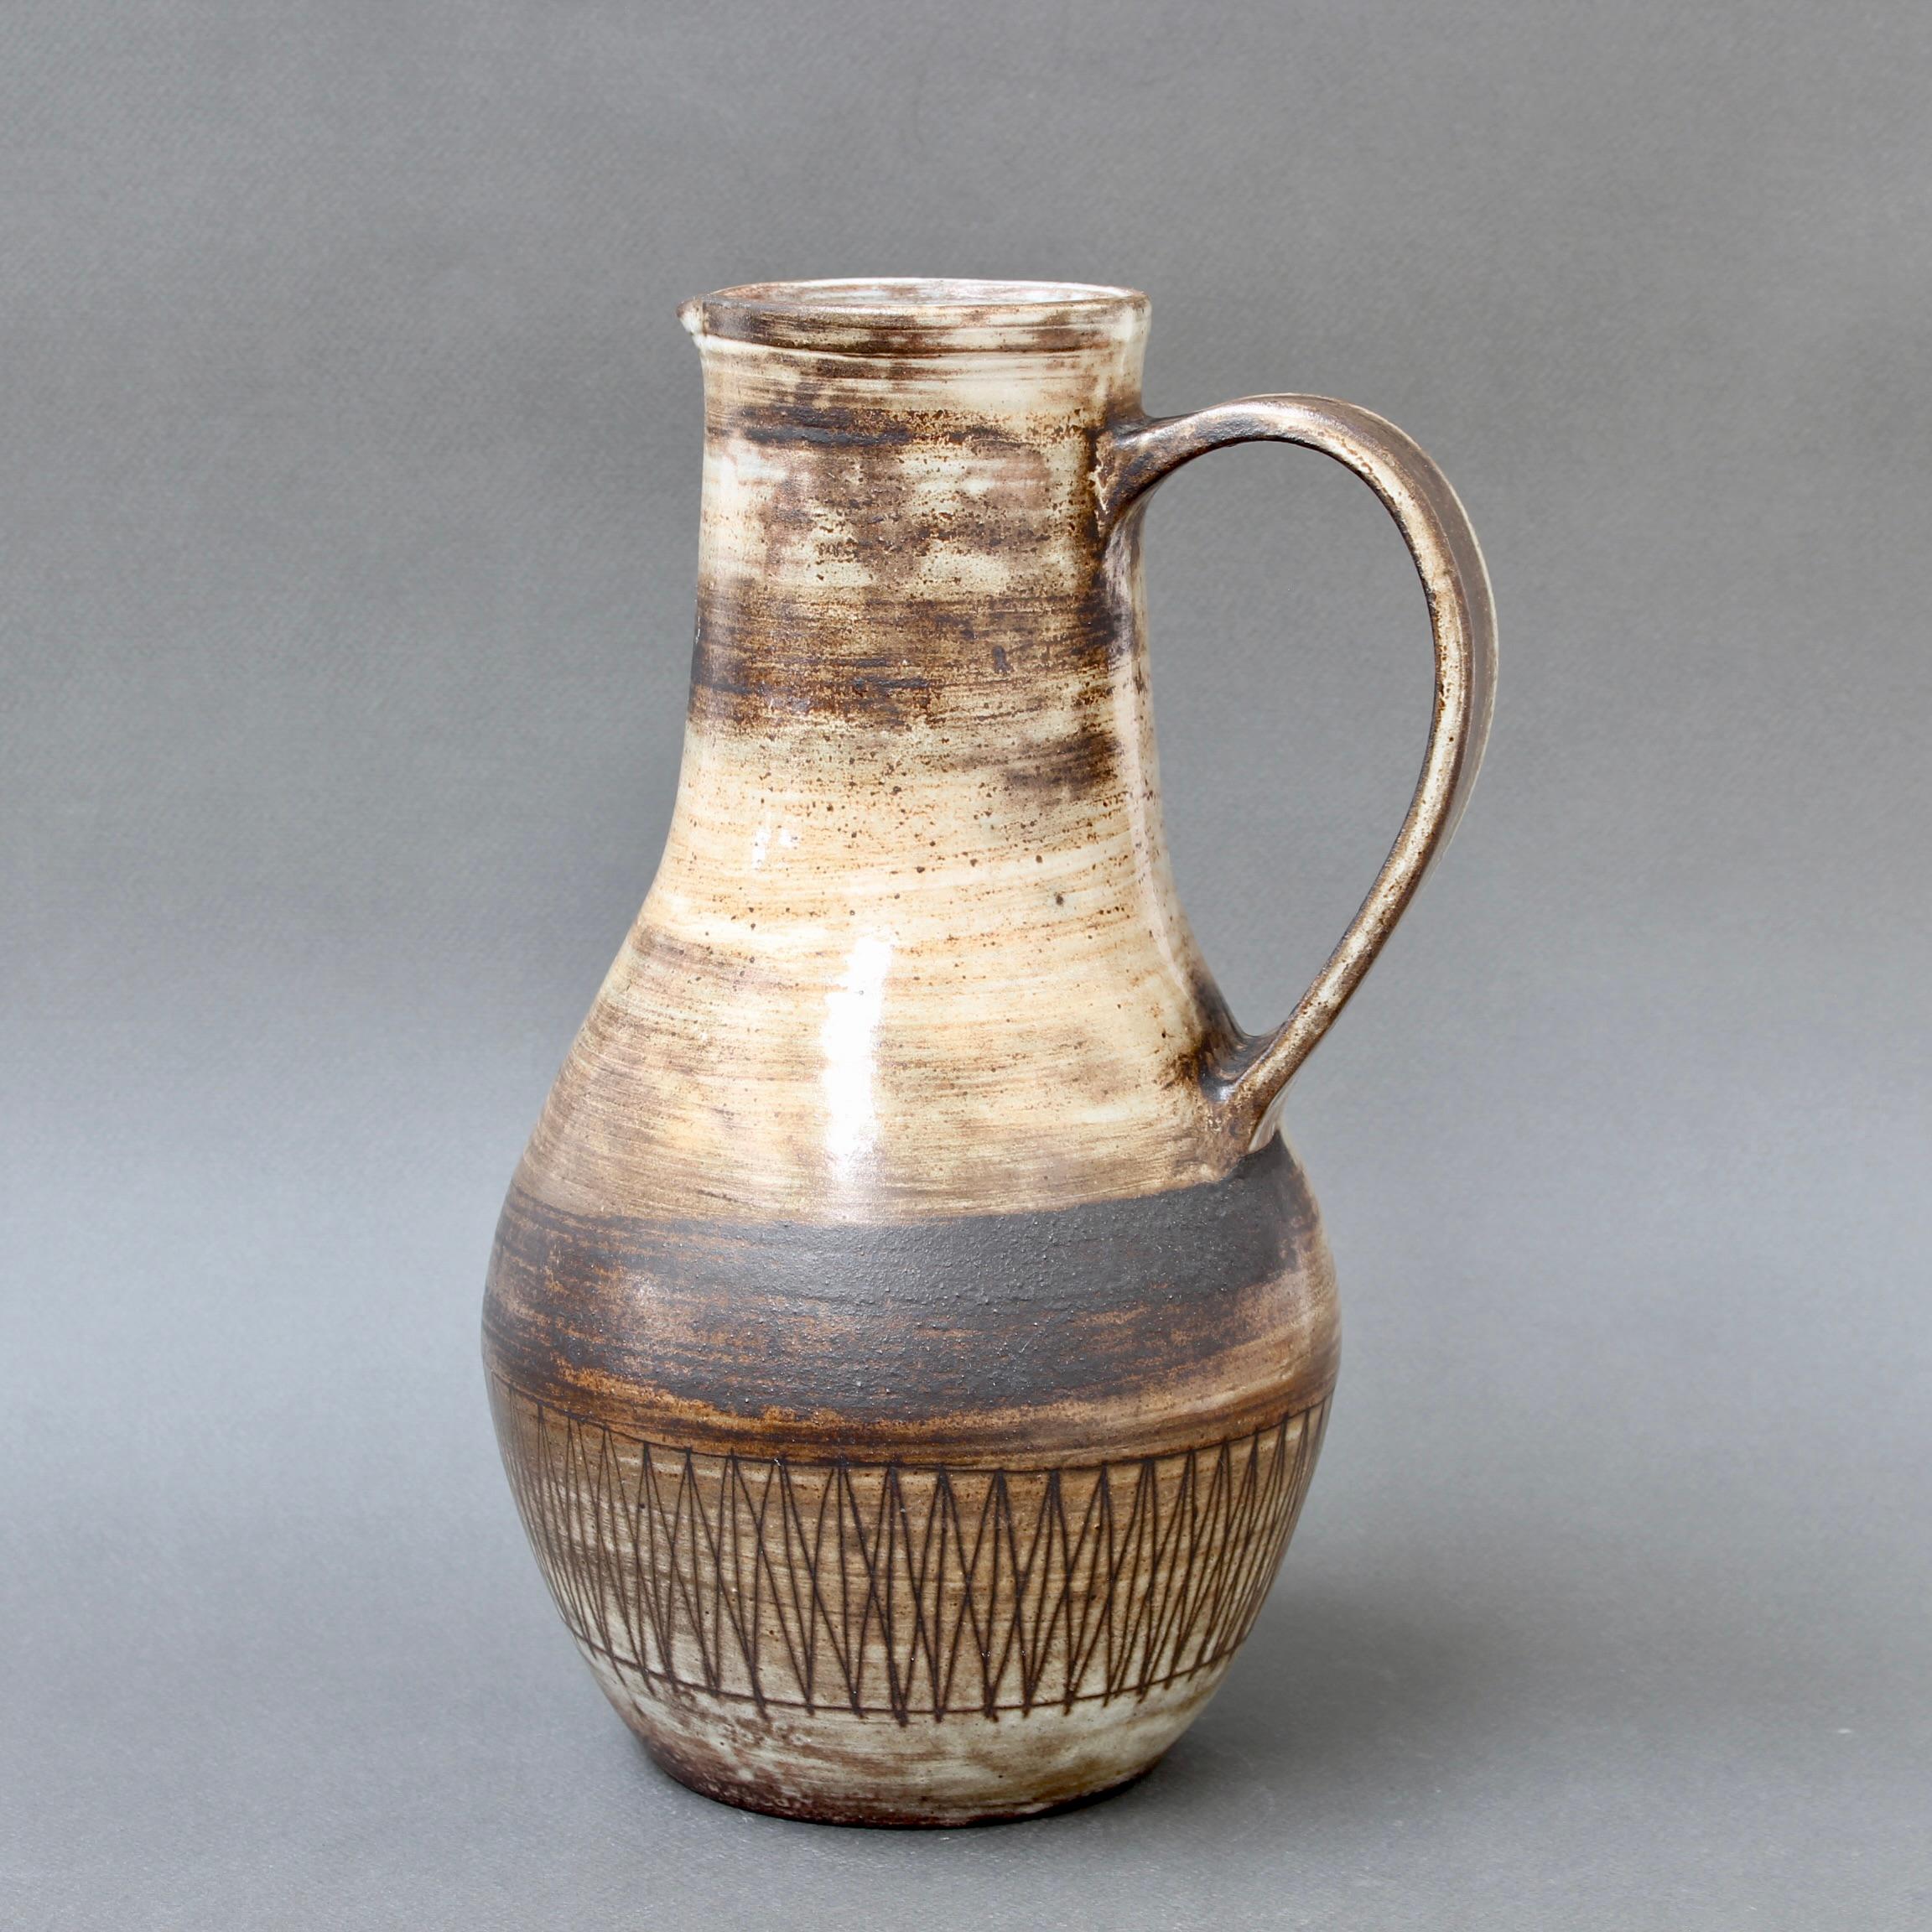 Mid-century ceramic pitcher by Jacques Pouchain / Atelier Dieulefit (circa 1960s). Classically-shaped piece in Pouchain's signature cloudy glaze style with earth tone hues. It is elegant with a contemporary motif surround of lines and geometric